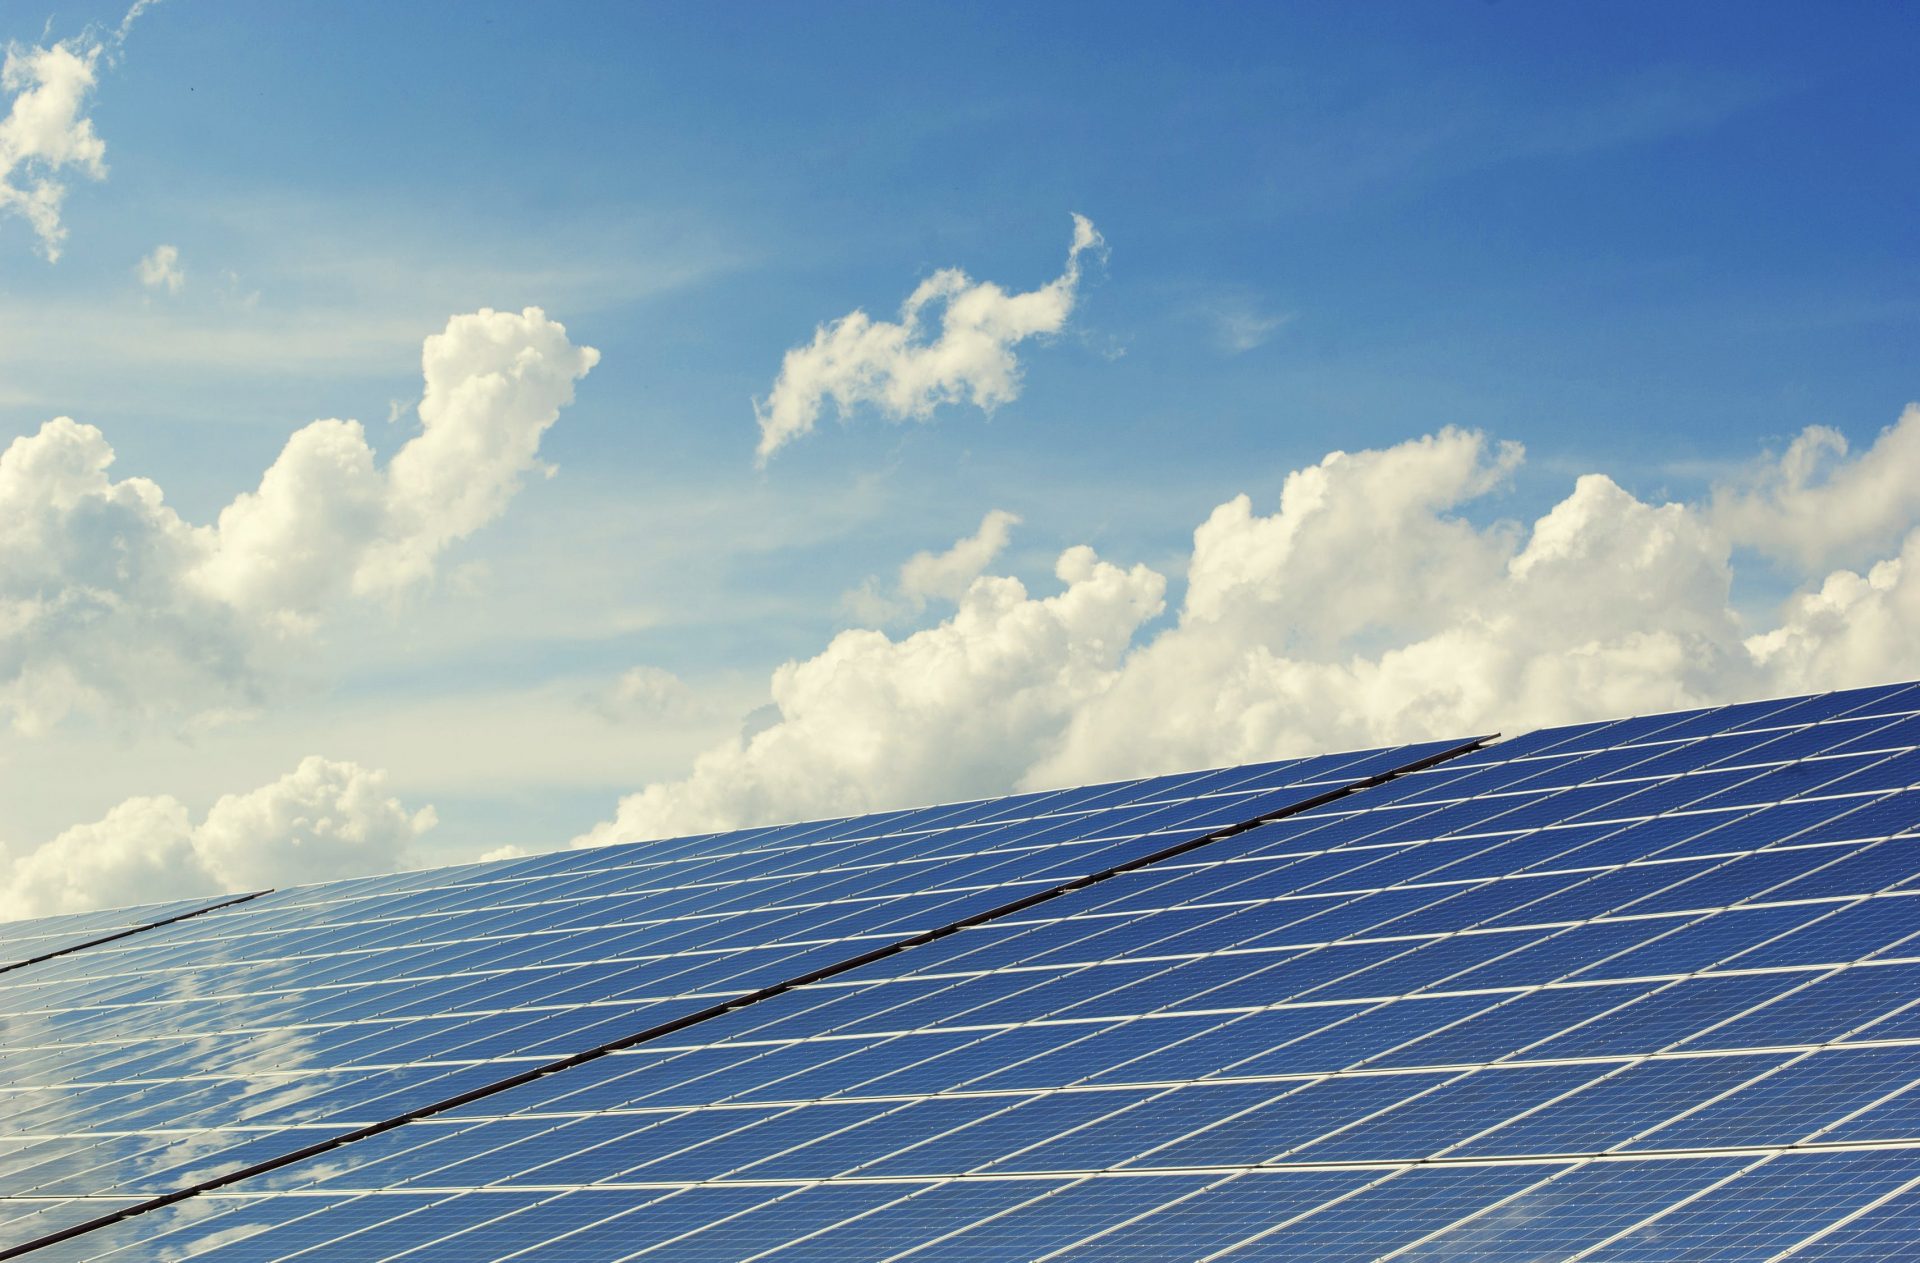 A Leading Solar Power Company has chosen to go with Progression Cloud for Managed SAP Hosting